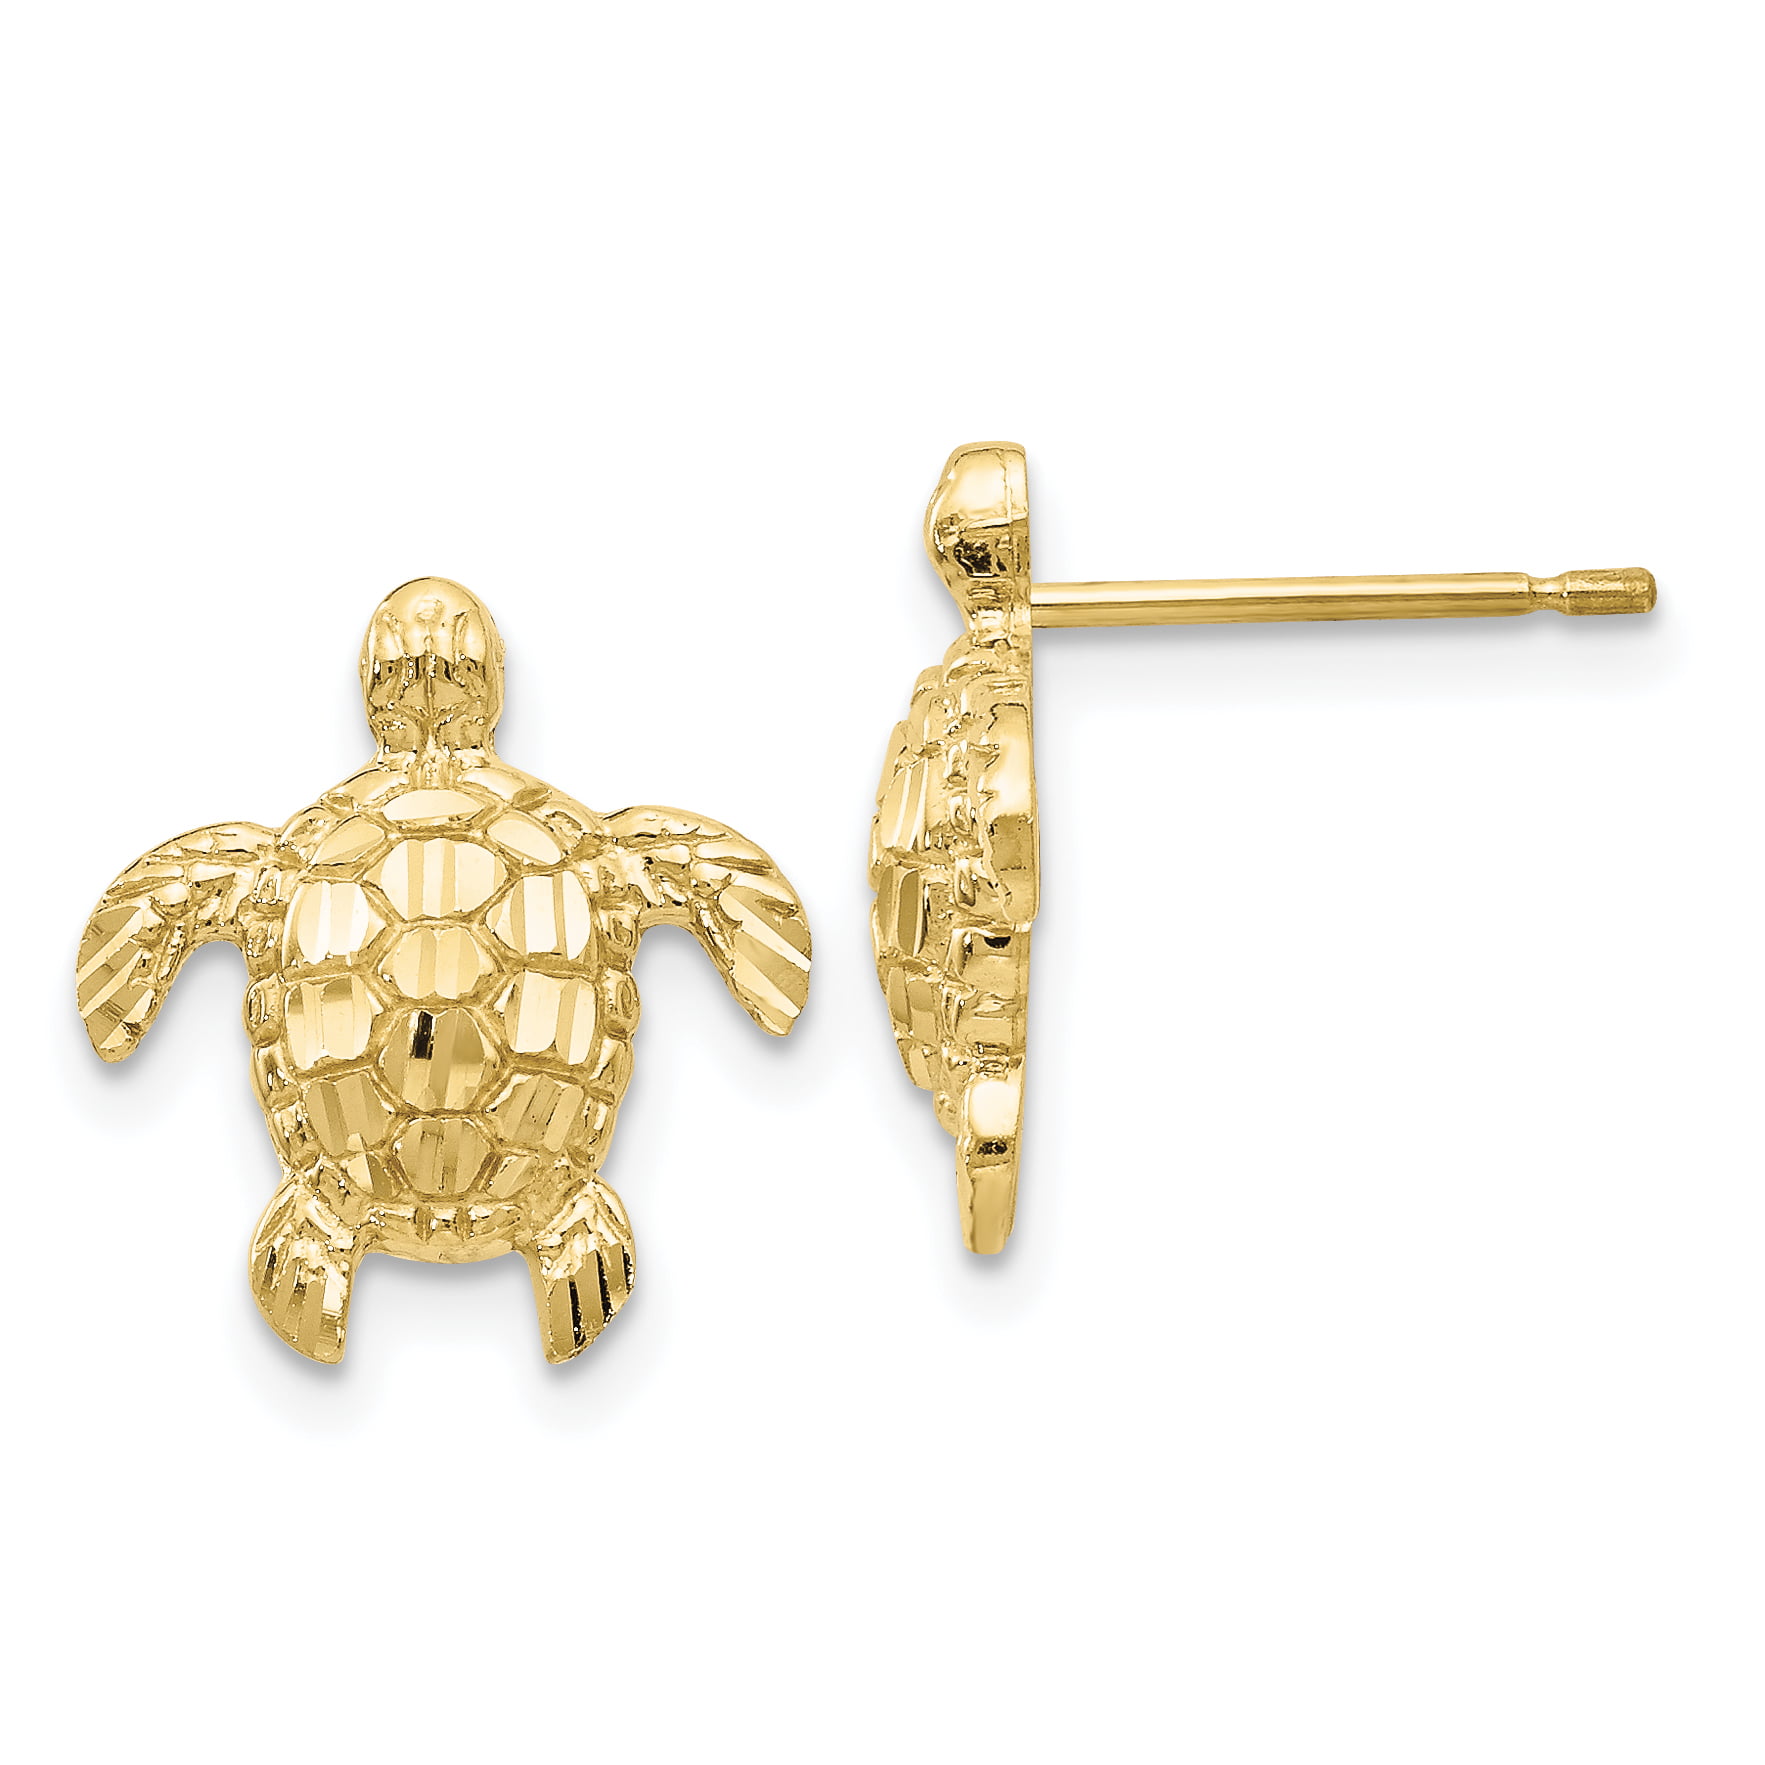 TEXTURED 15.95 mm X 10.6 mm Details about   14k 14kt Yellow Gold LAND TURTLE POST EARRINGS 